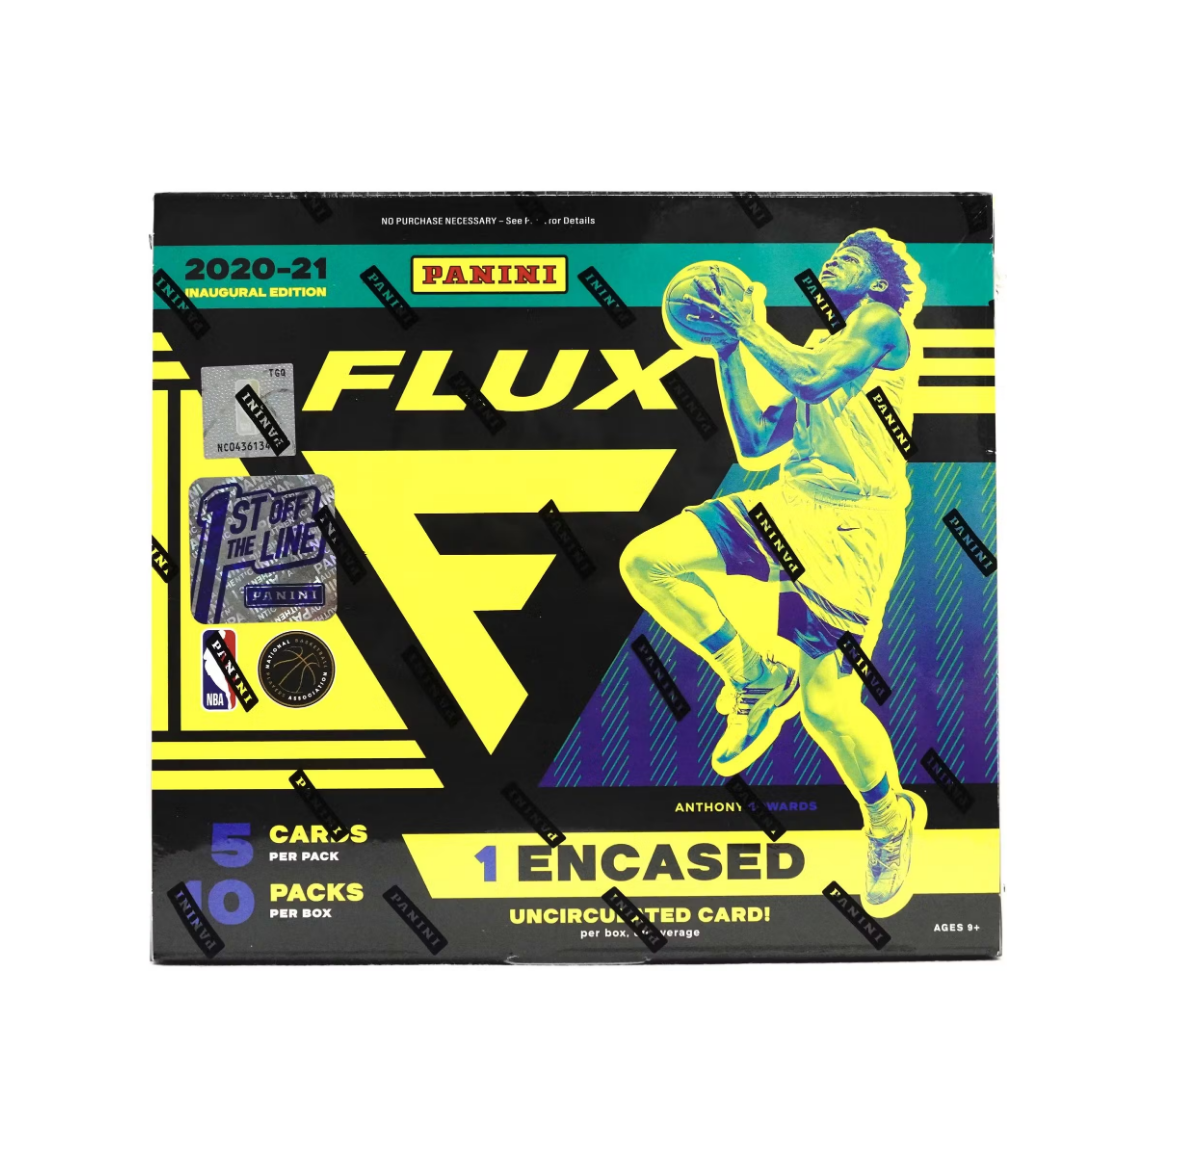 2020-21 Panini Basketball Flux First Off The Line Hobby Box